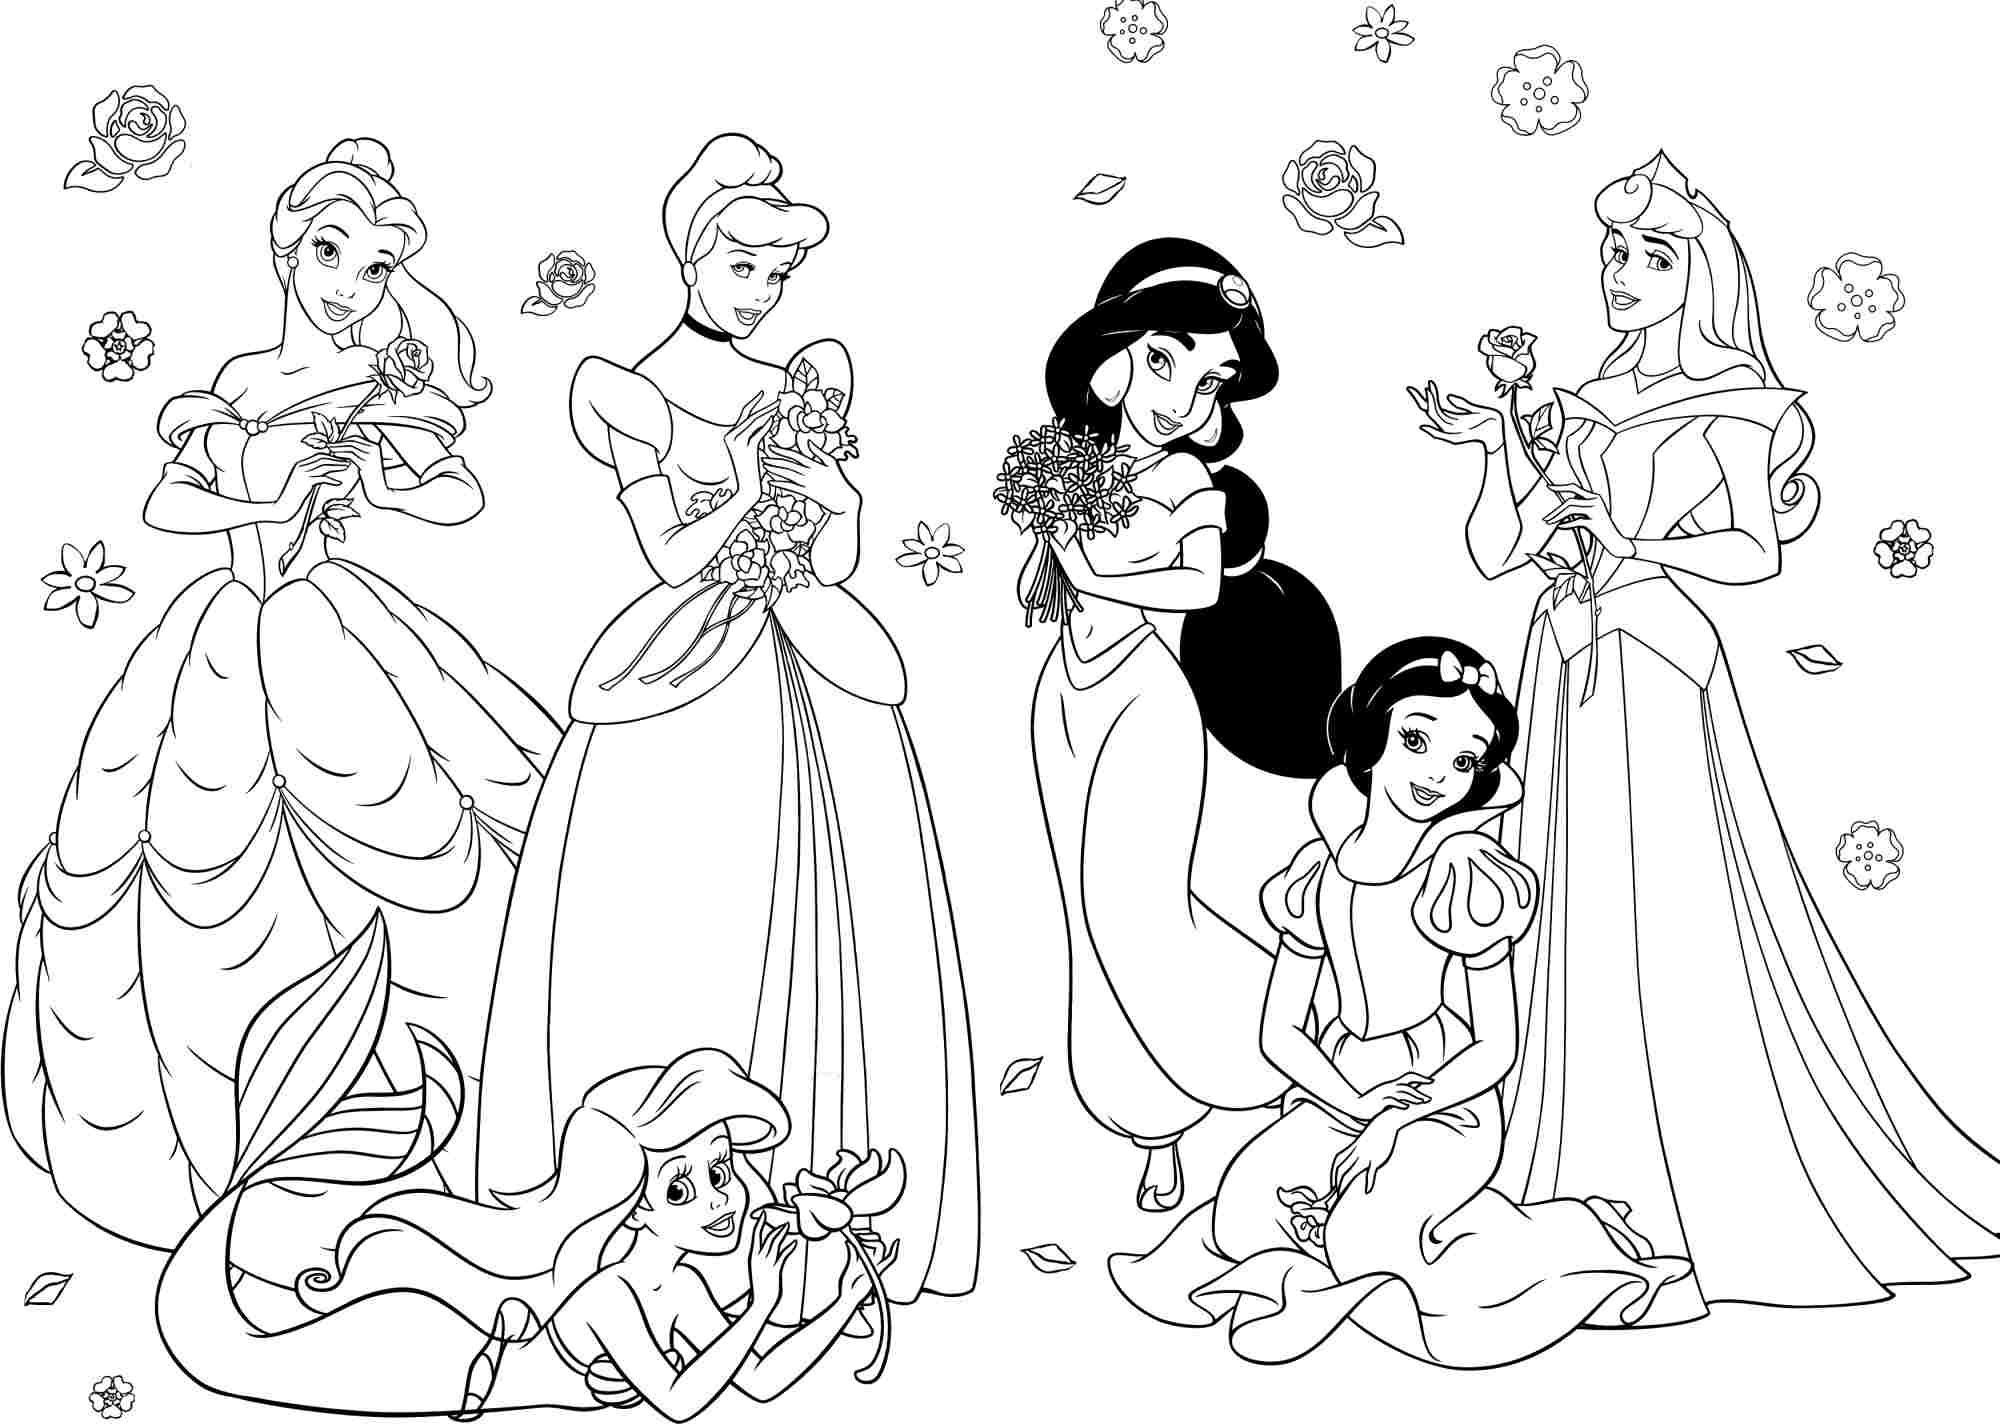 Disney Princess Coloring Pages To Print   Coloring Page Photos ...